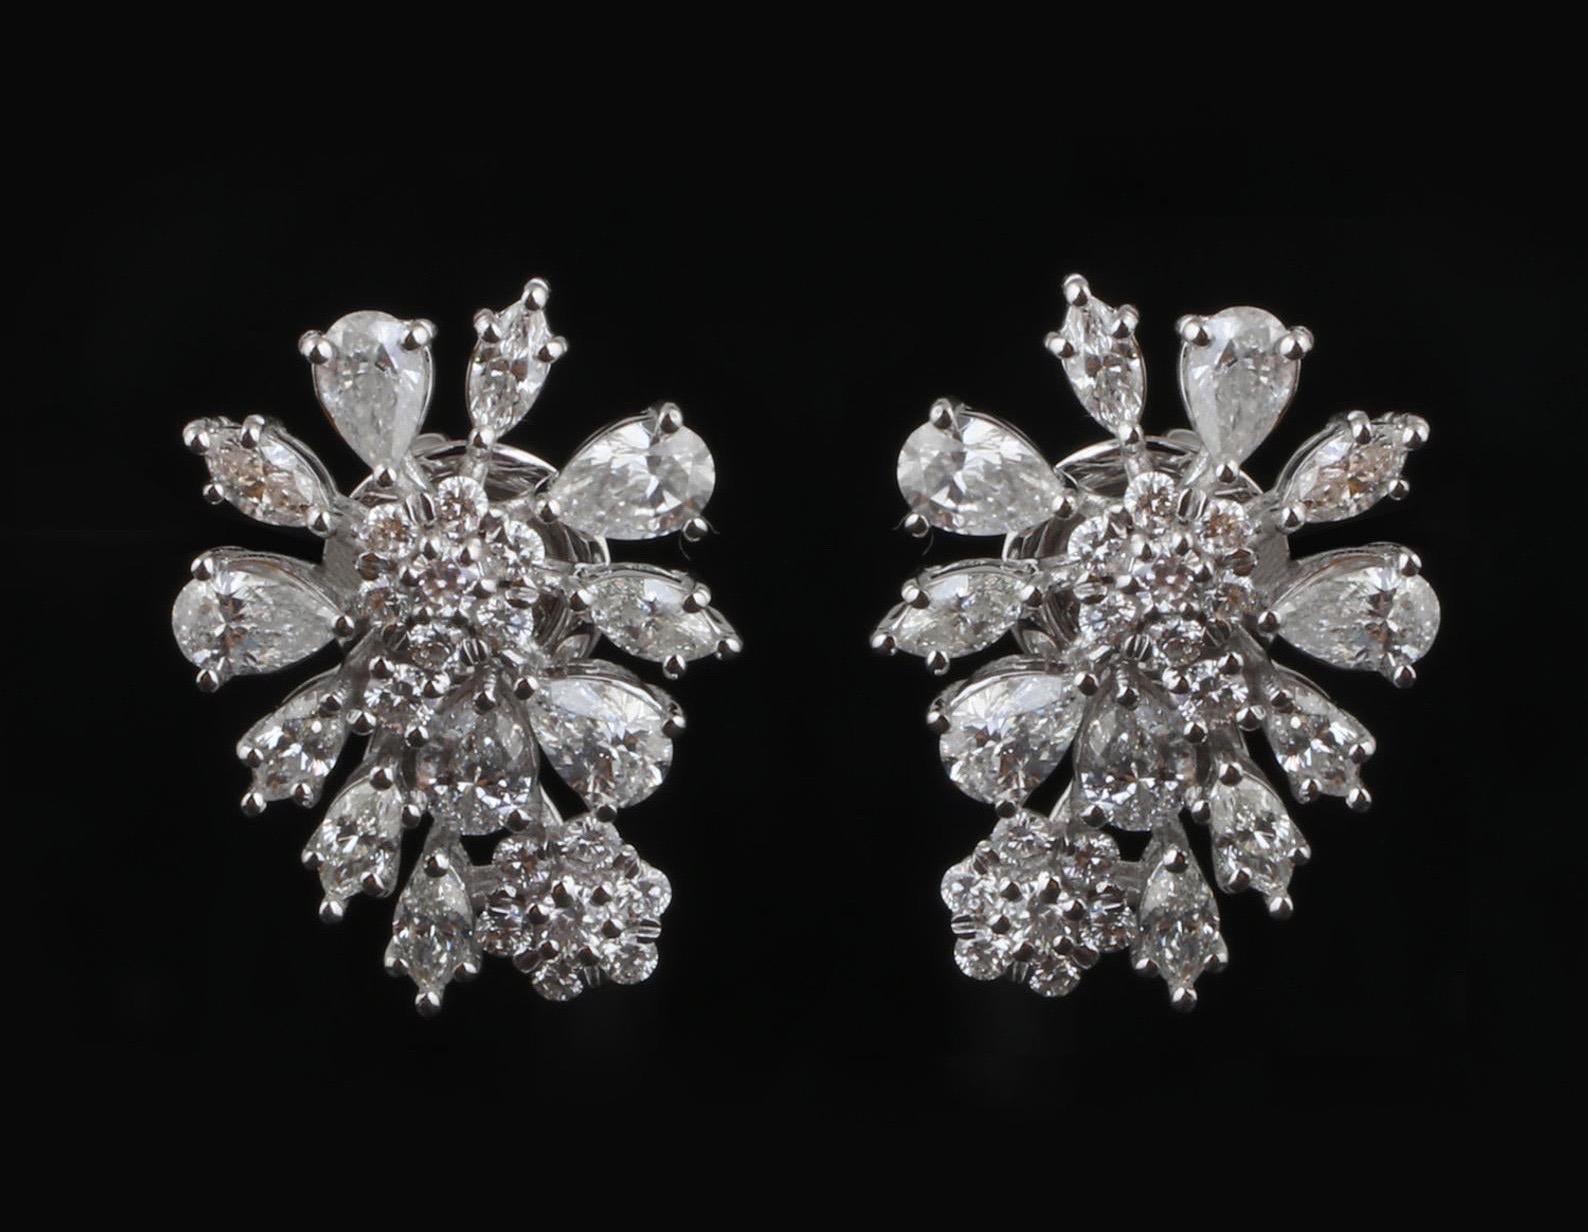 Cast in 14 karat white gold. These stunning stud earrings are handset with 2.15 carats of sparkling diamonds. Sweep hair off your face to really let them shine.

FOLLOW MEGHNA JEWELS storefront to view the latest collection & exclusive pieces.